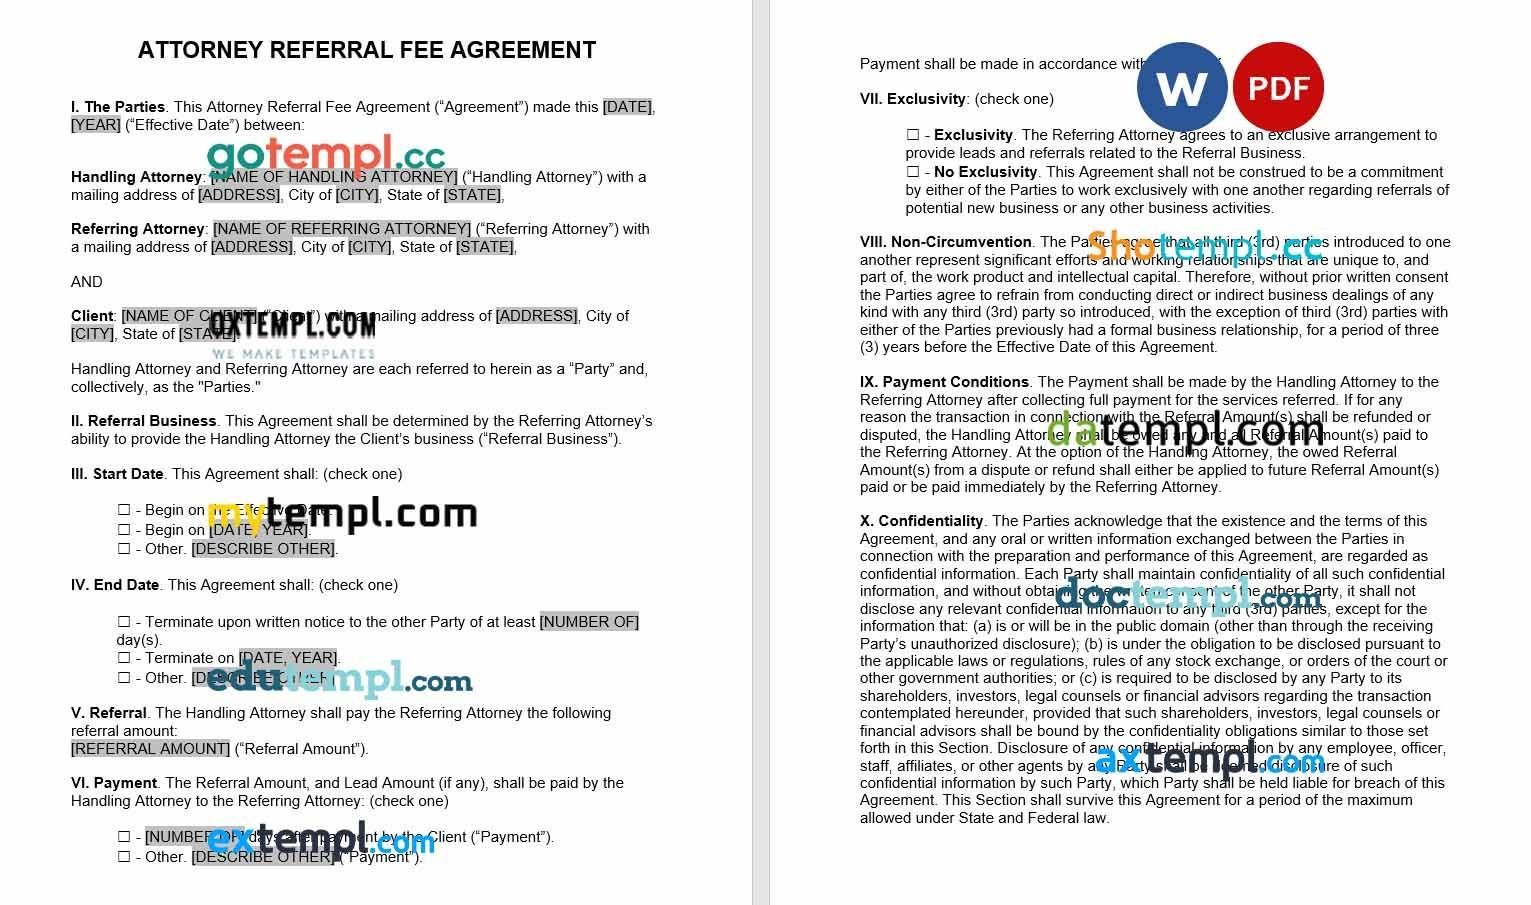 Attorney Referral Fee Affiliate Agreement Word example